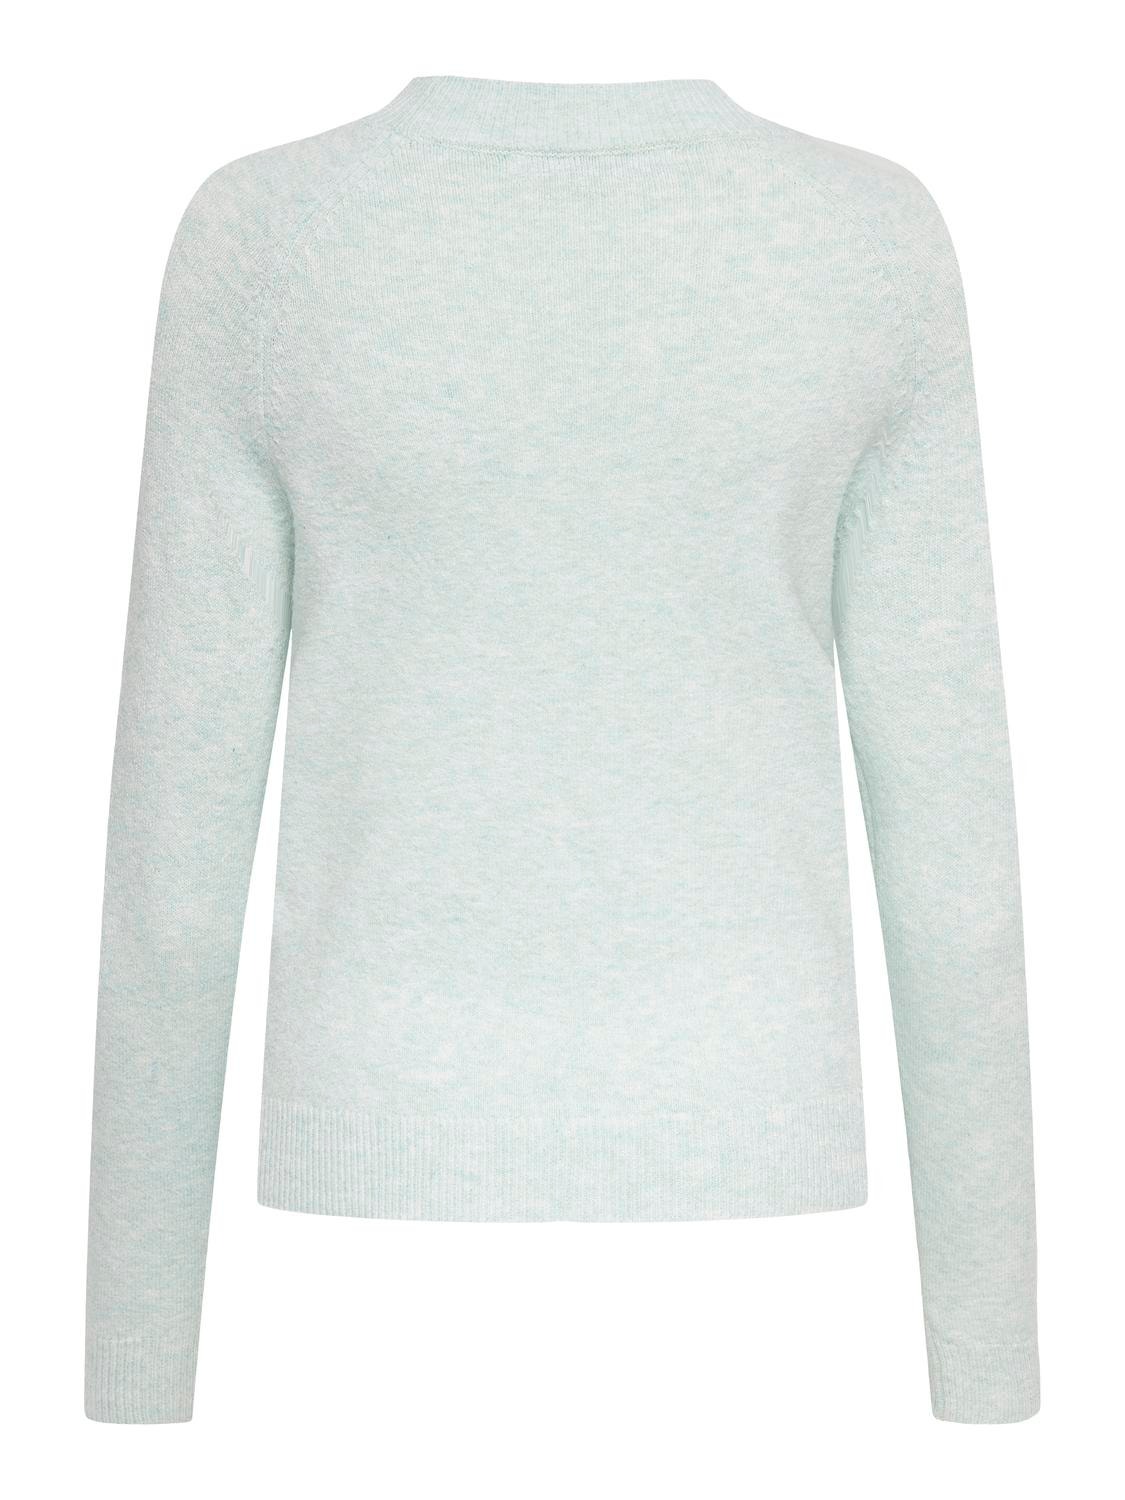 ONLY o-neck knitted pullover -Mist Green - 15204279